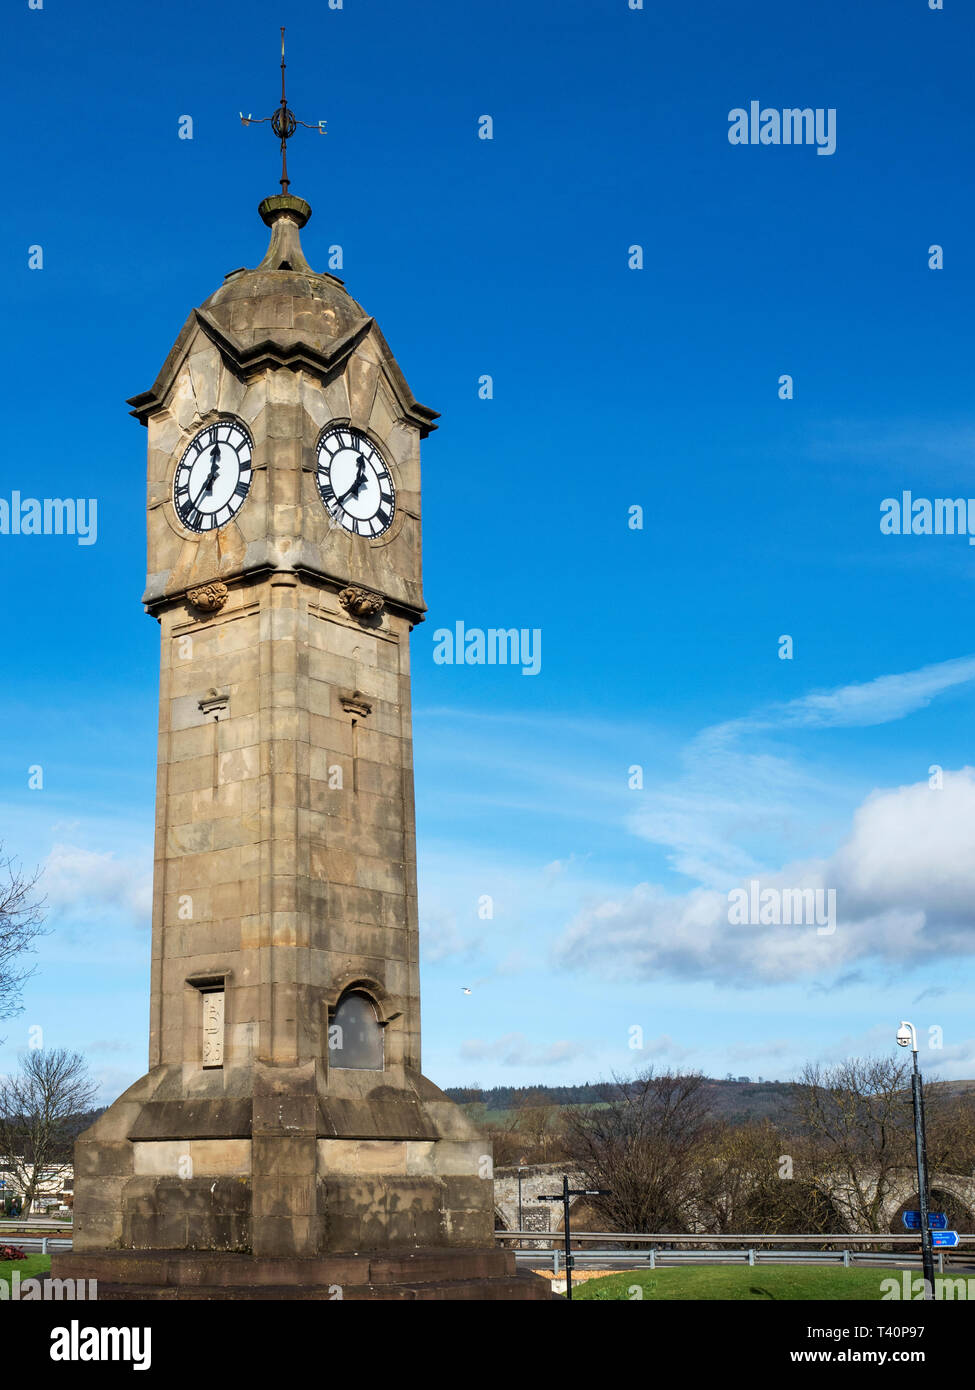 The Bridge Clock Tower at the Customs Roundabout gifted to Stirling in 1910 City of Stirling Scotland Stock Photo